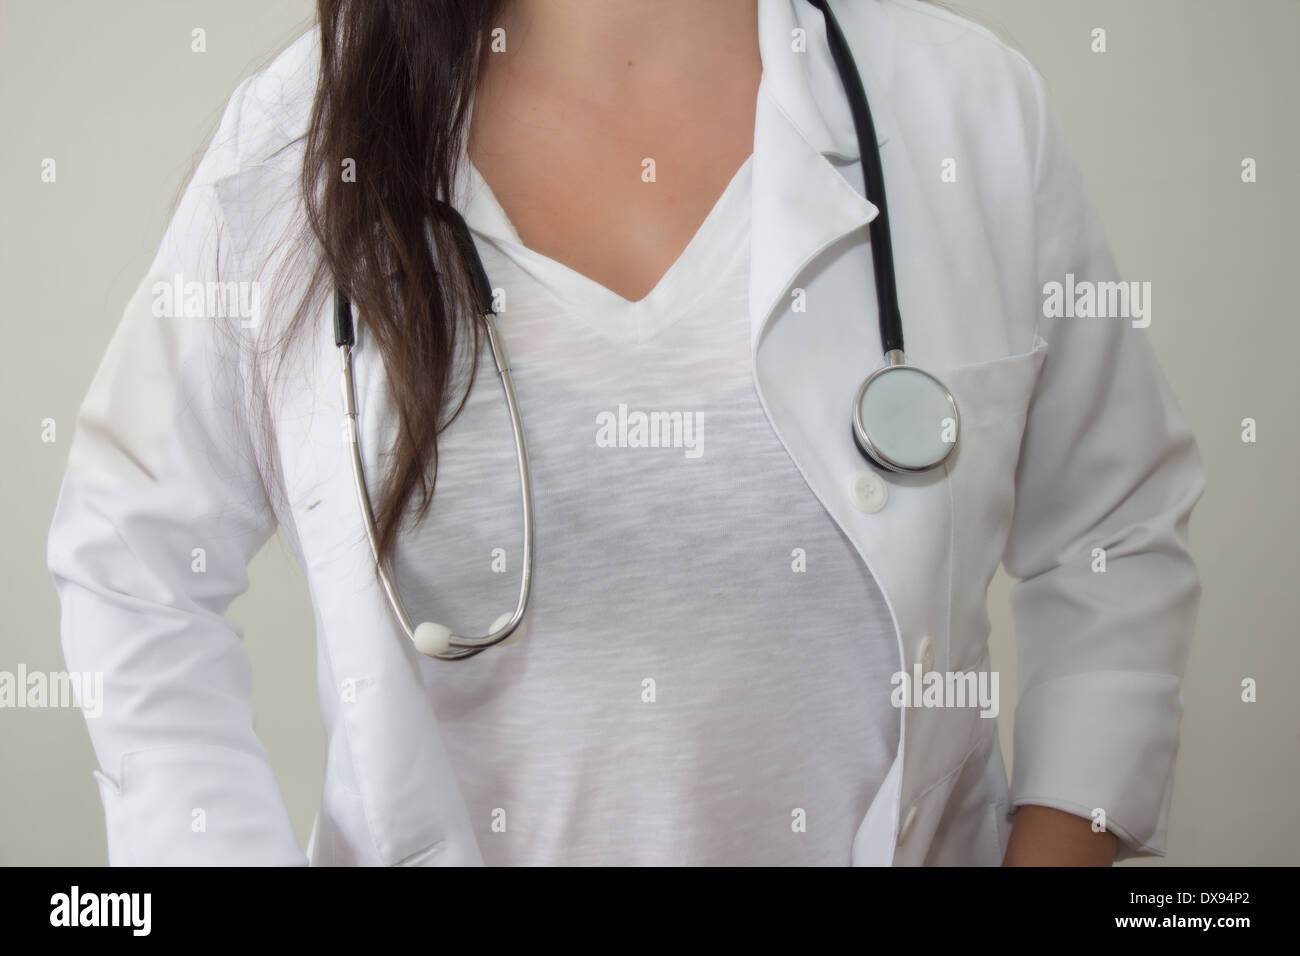 a female doctor with stethoscope Stock Photo